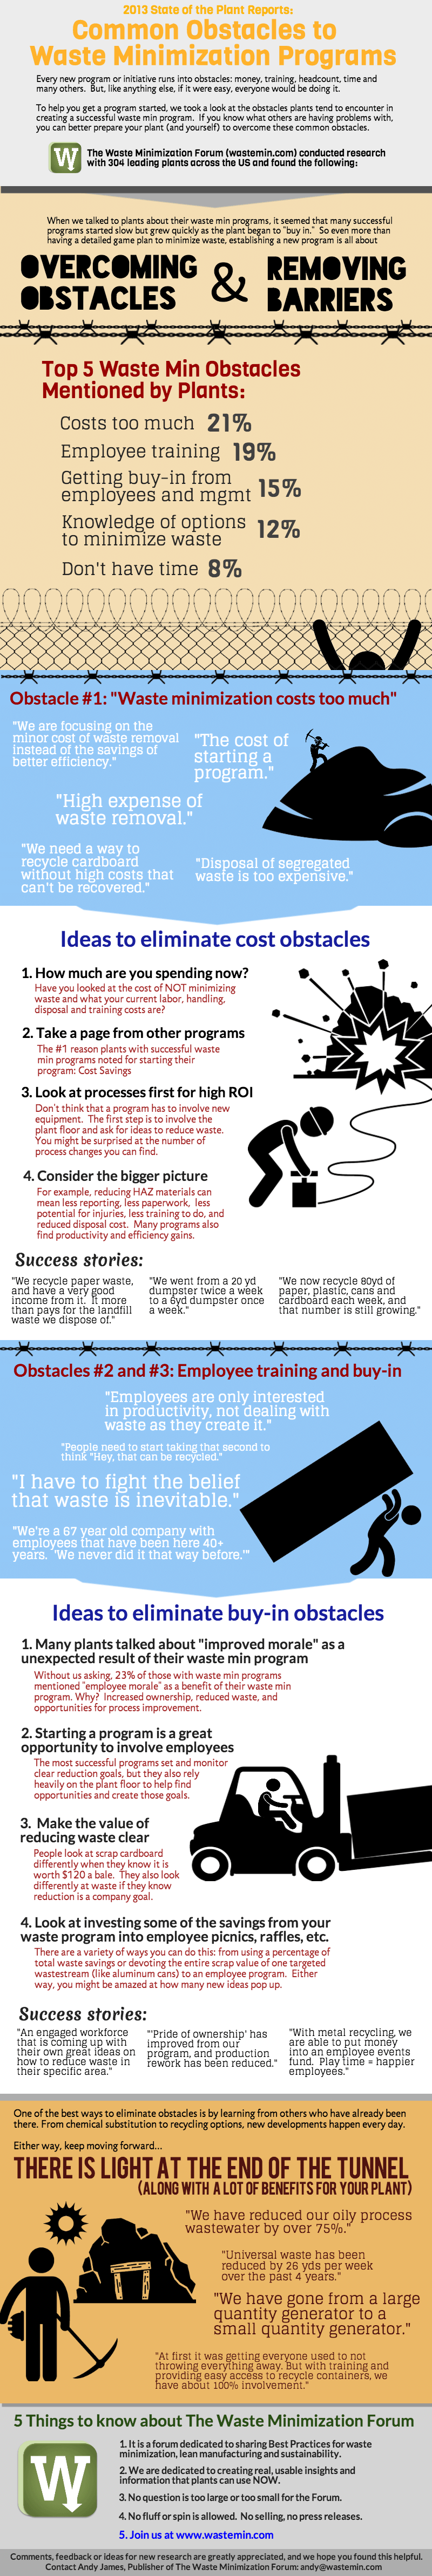 Common Obstacles to Waste Minimization Programs Infographic.png